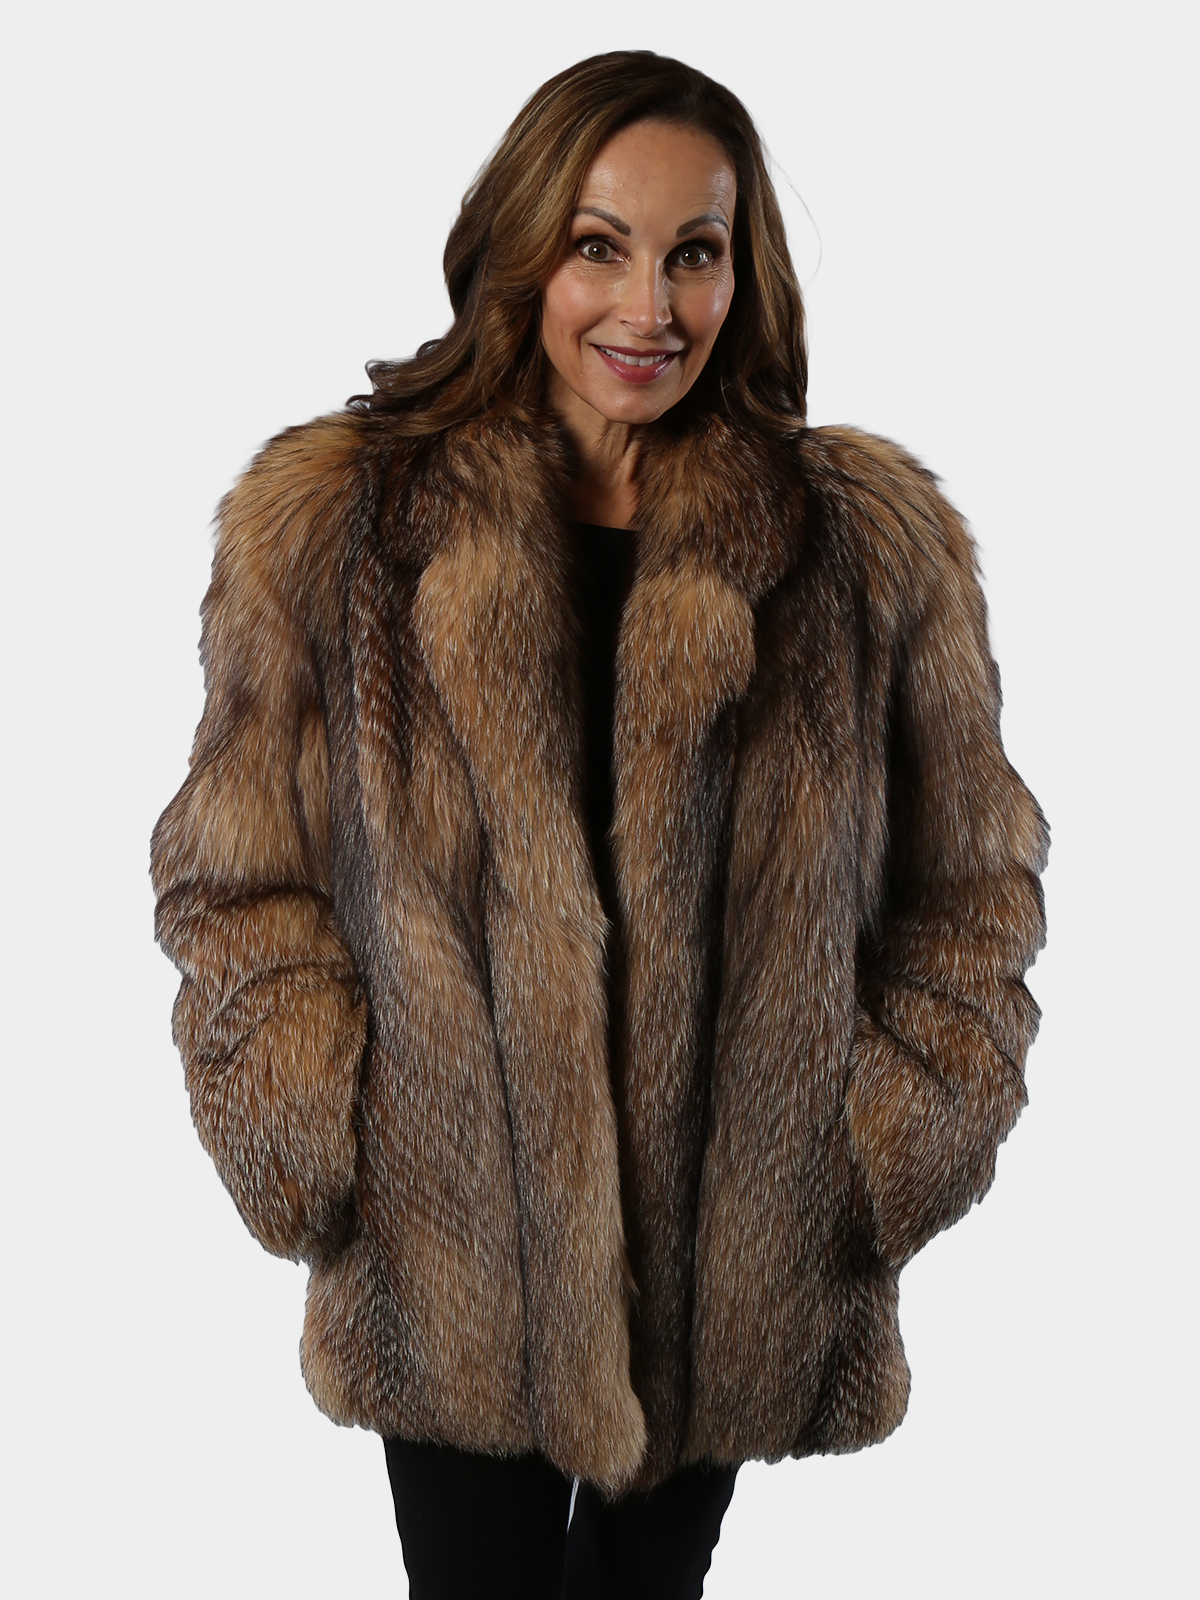 Fur Coat at Best Price from Manufacturers, Suppliers & Dealers